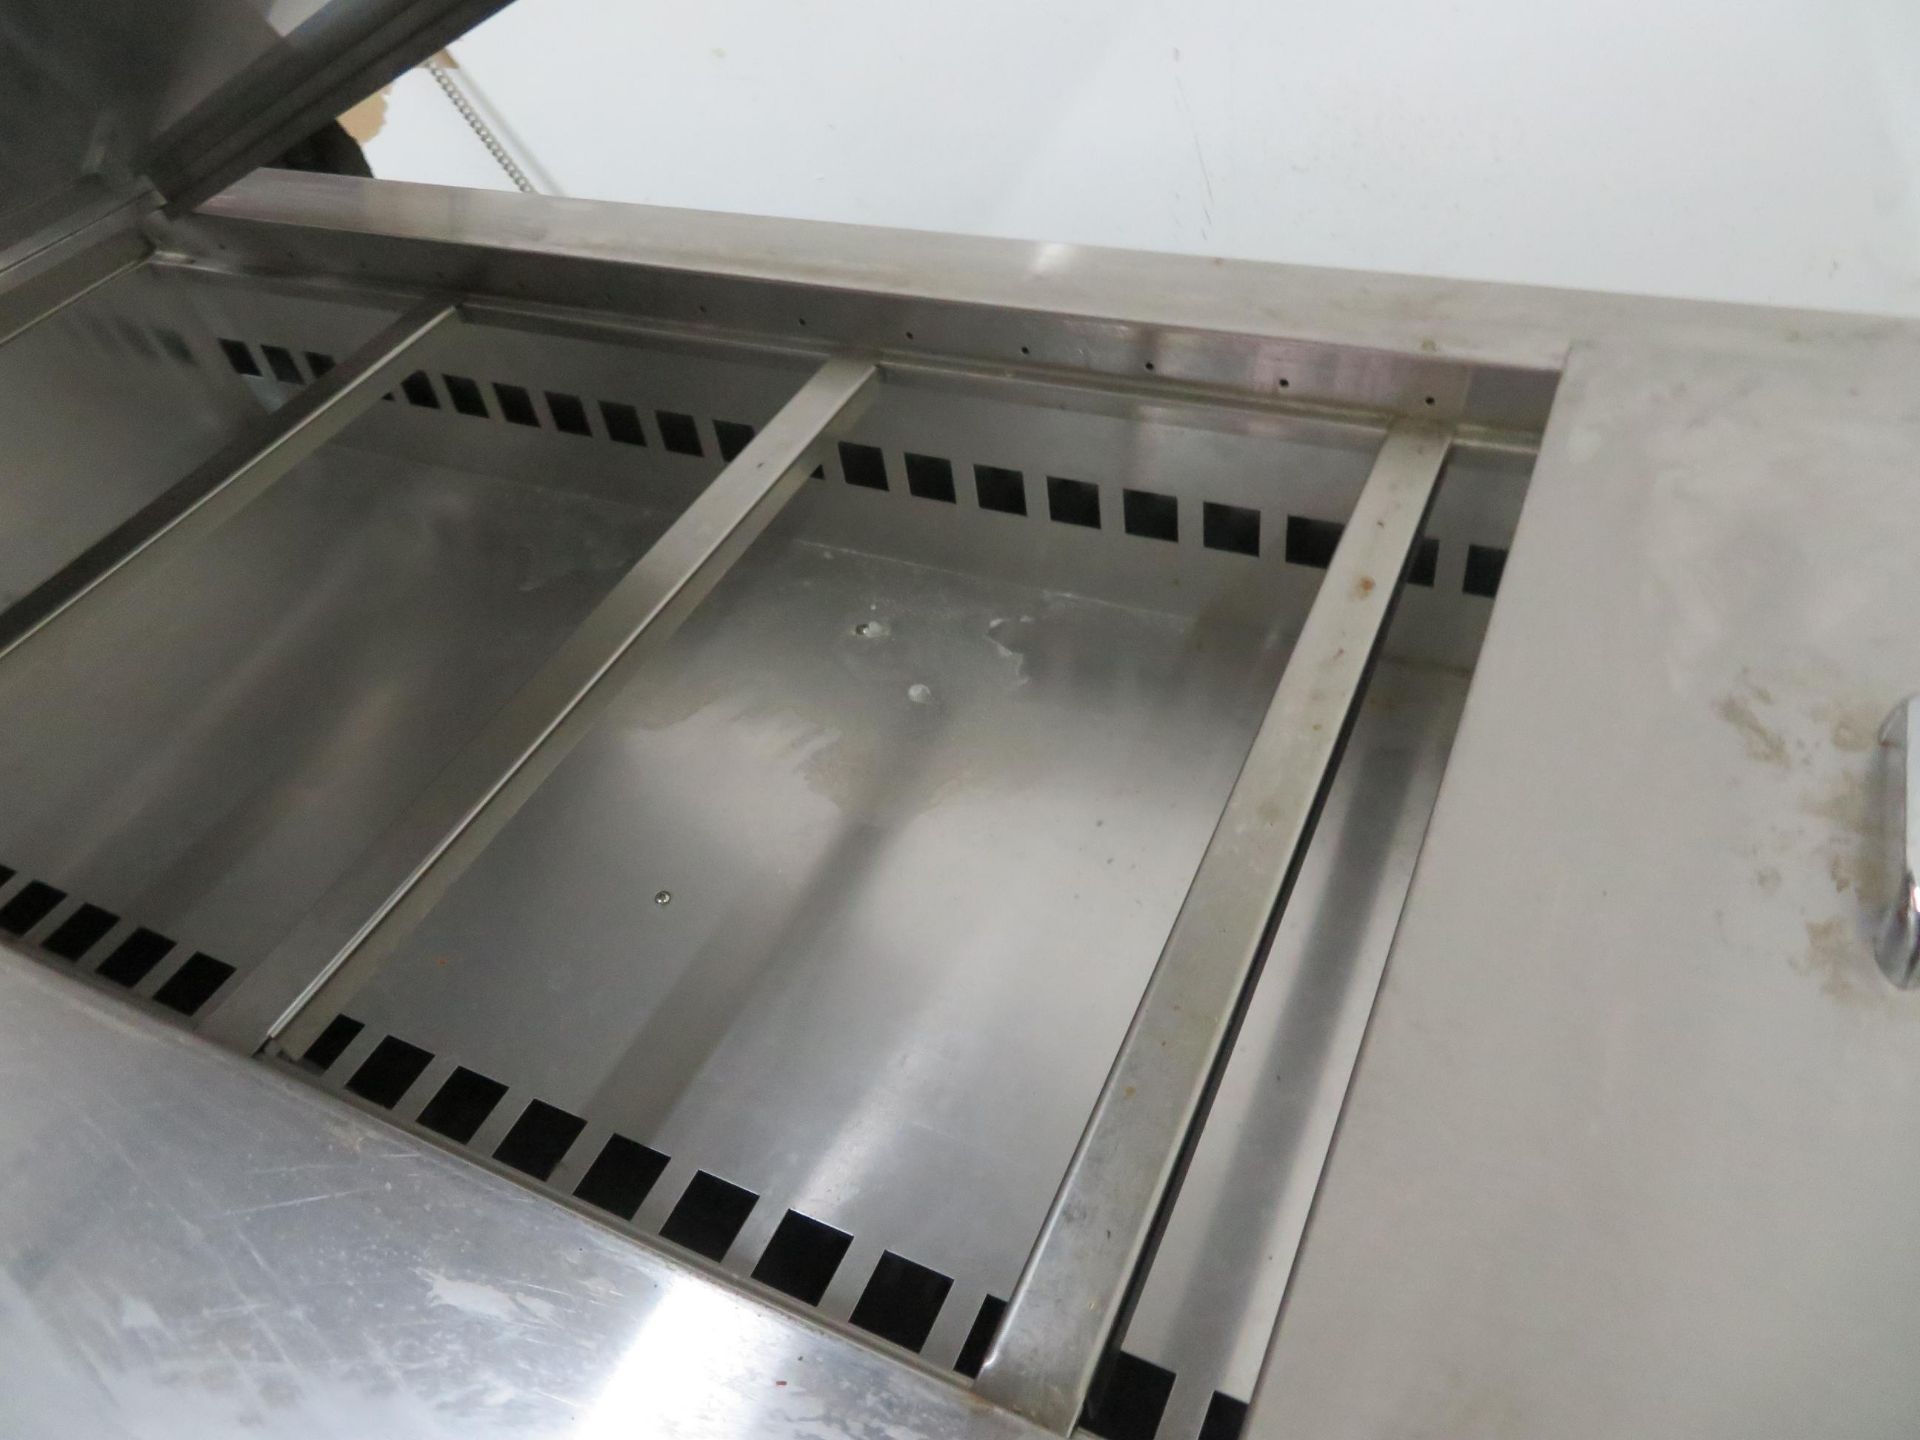 INOX FAB 3 door stainless steel refrigerated table, Mod # TSBCI-84-32 approx. 84"w x32"d x 36"h - Image 4 of 4